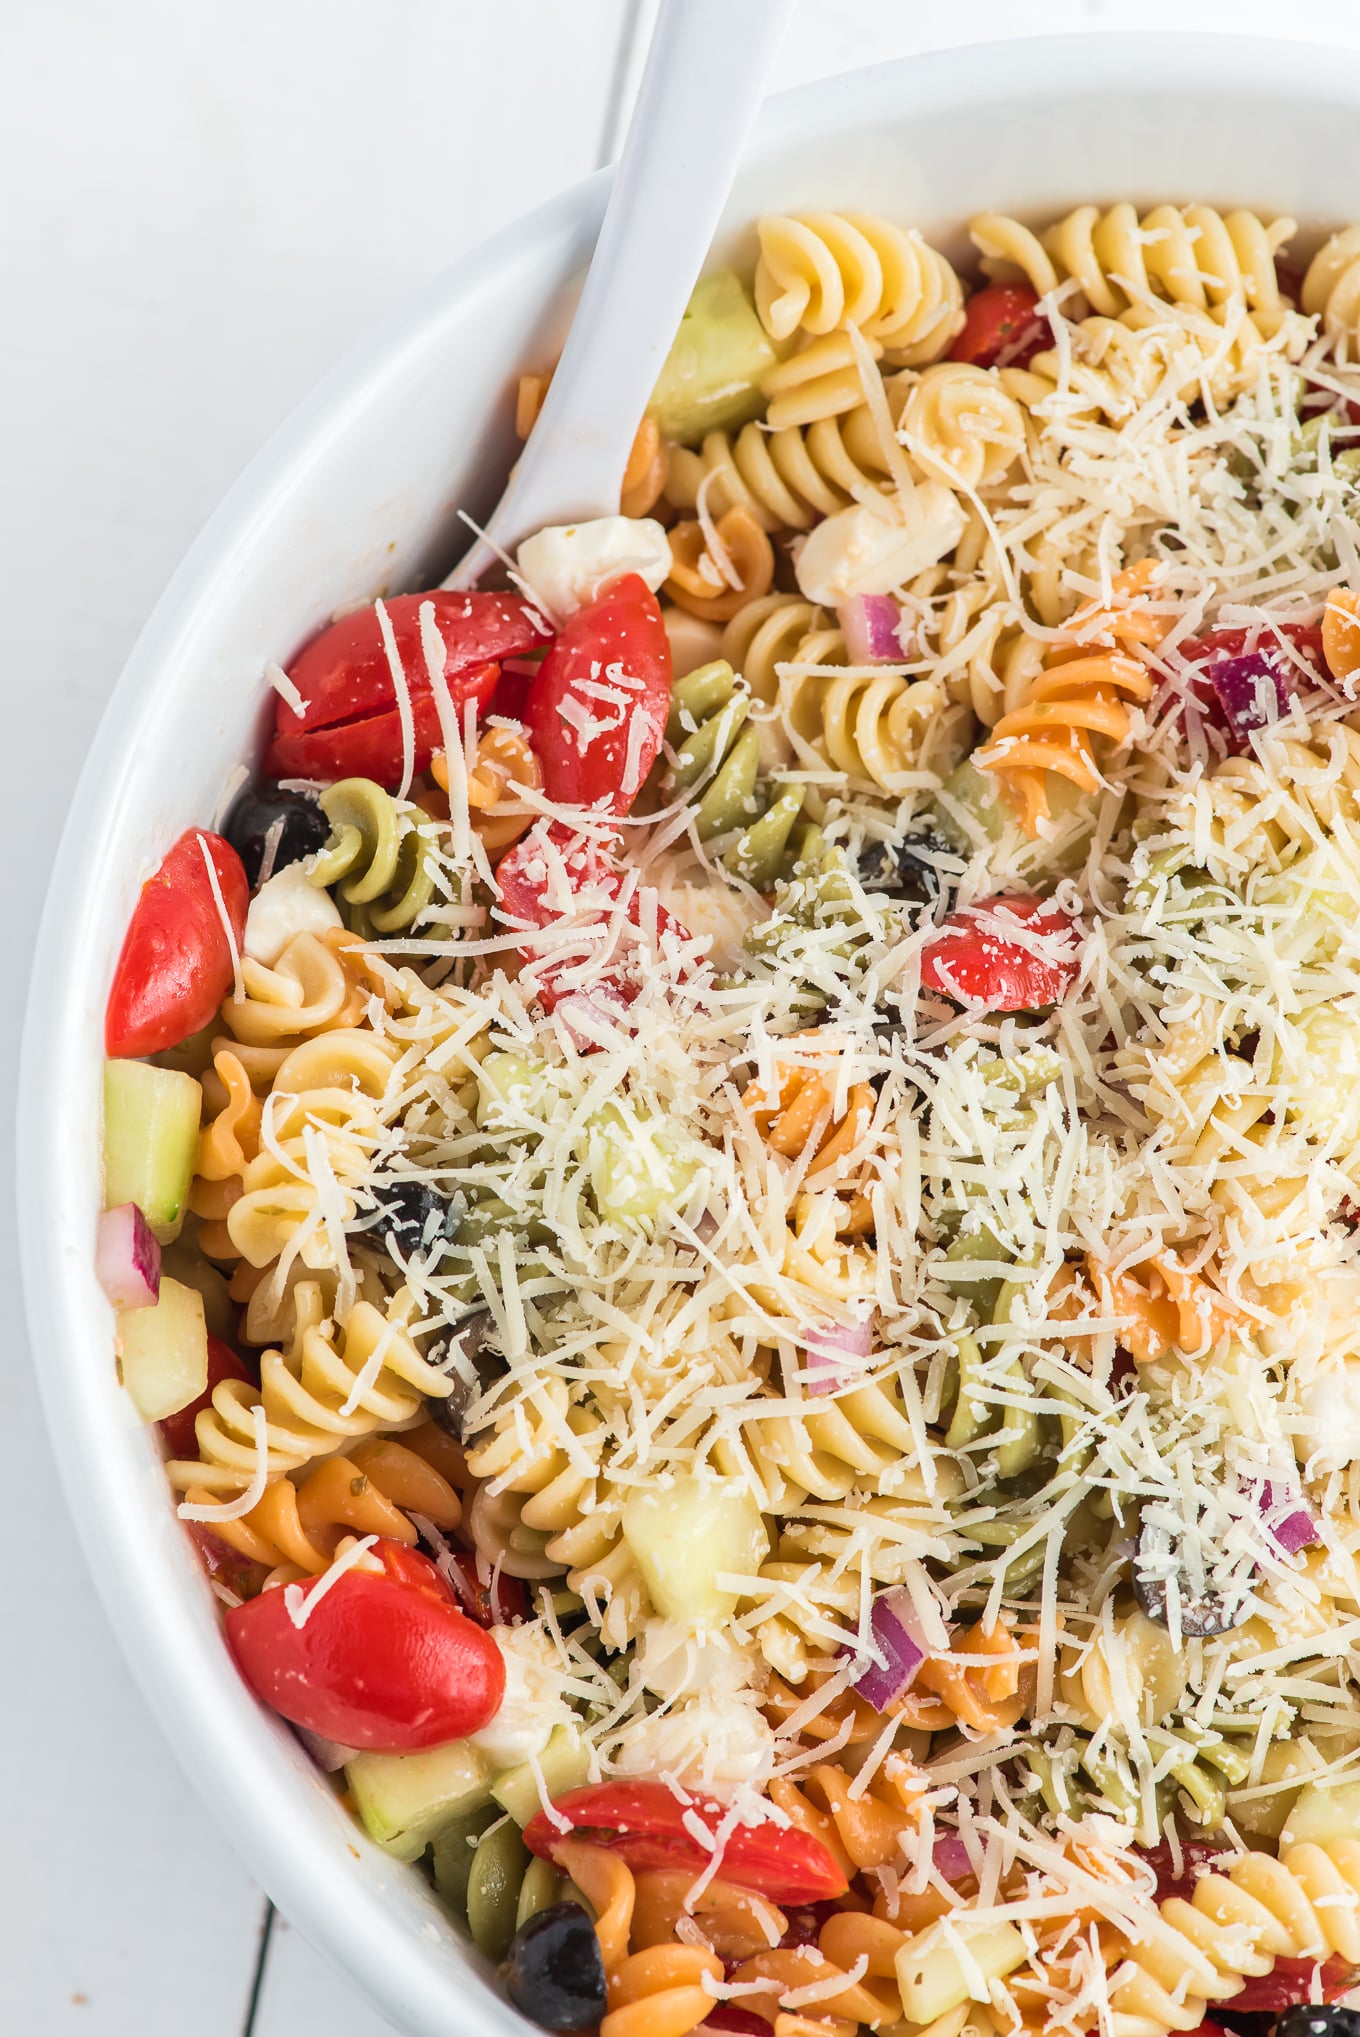 Pasta salad in serving bowl / Easy Pasta Salad is the best cold pasta salad with tri color pasta, tomatoes, cucumbers, onions, and mozzarella cheese tossed in olive garden Italian dressing. 